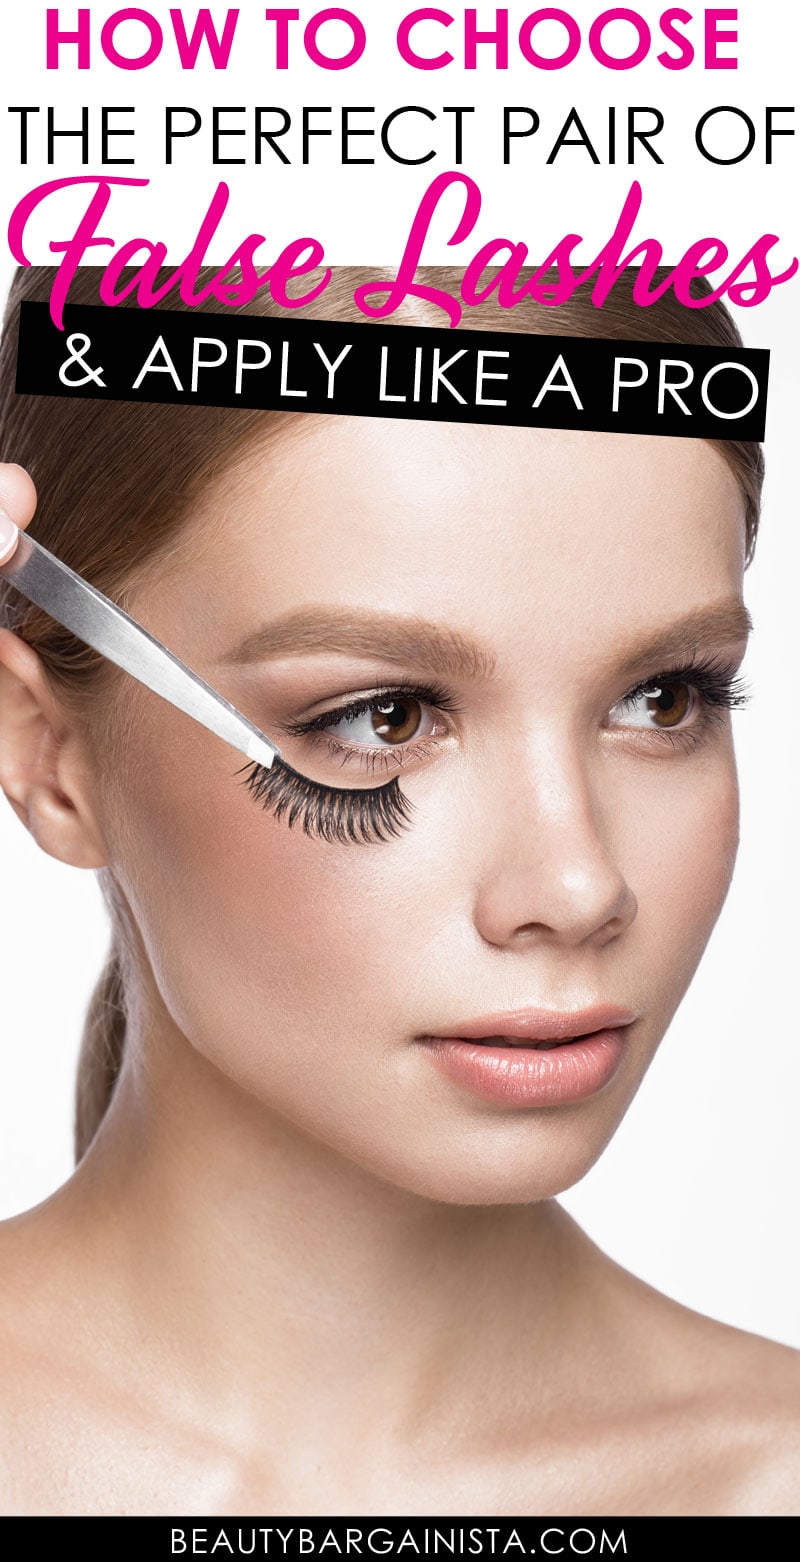 Want to upgrade your eyes quickly and easily? When properly applied, false eyelashes blend in well with your natural lashes, so it's difficult to tell the real fringe from the fake. Follow these steps ( and easy to do tutorials) on how to apply fake eyelashes and gorgeous 5 minutes or less.